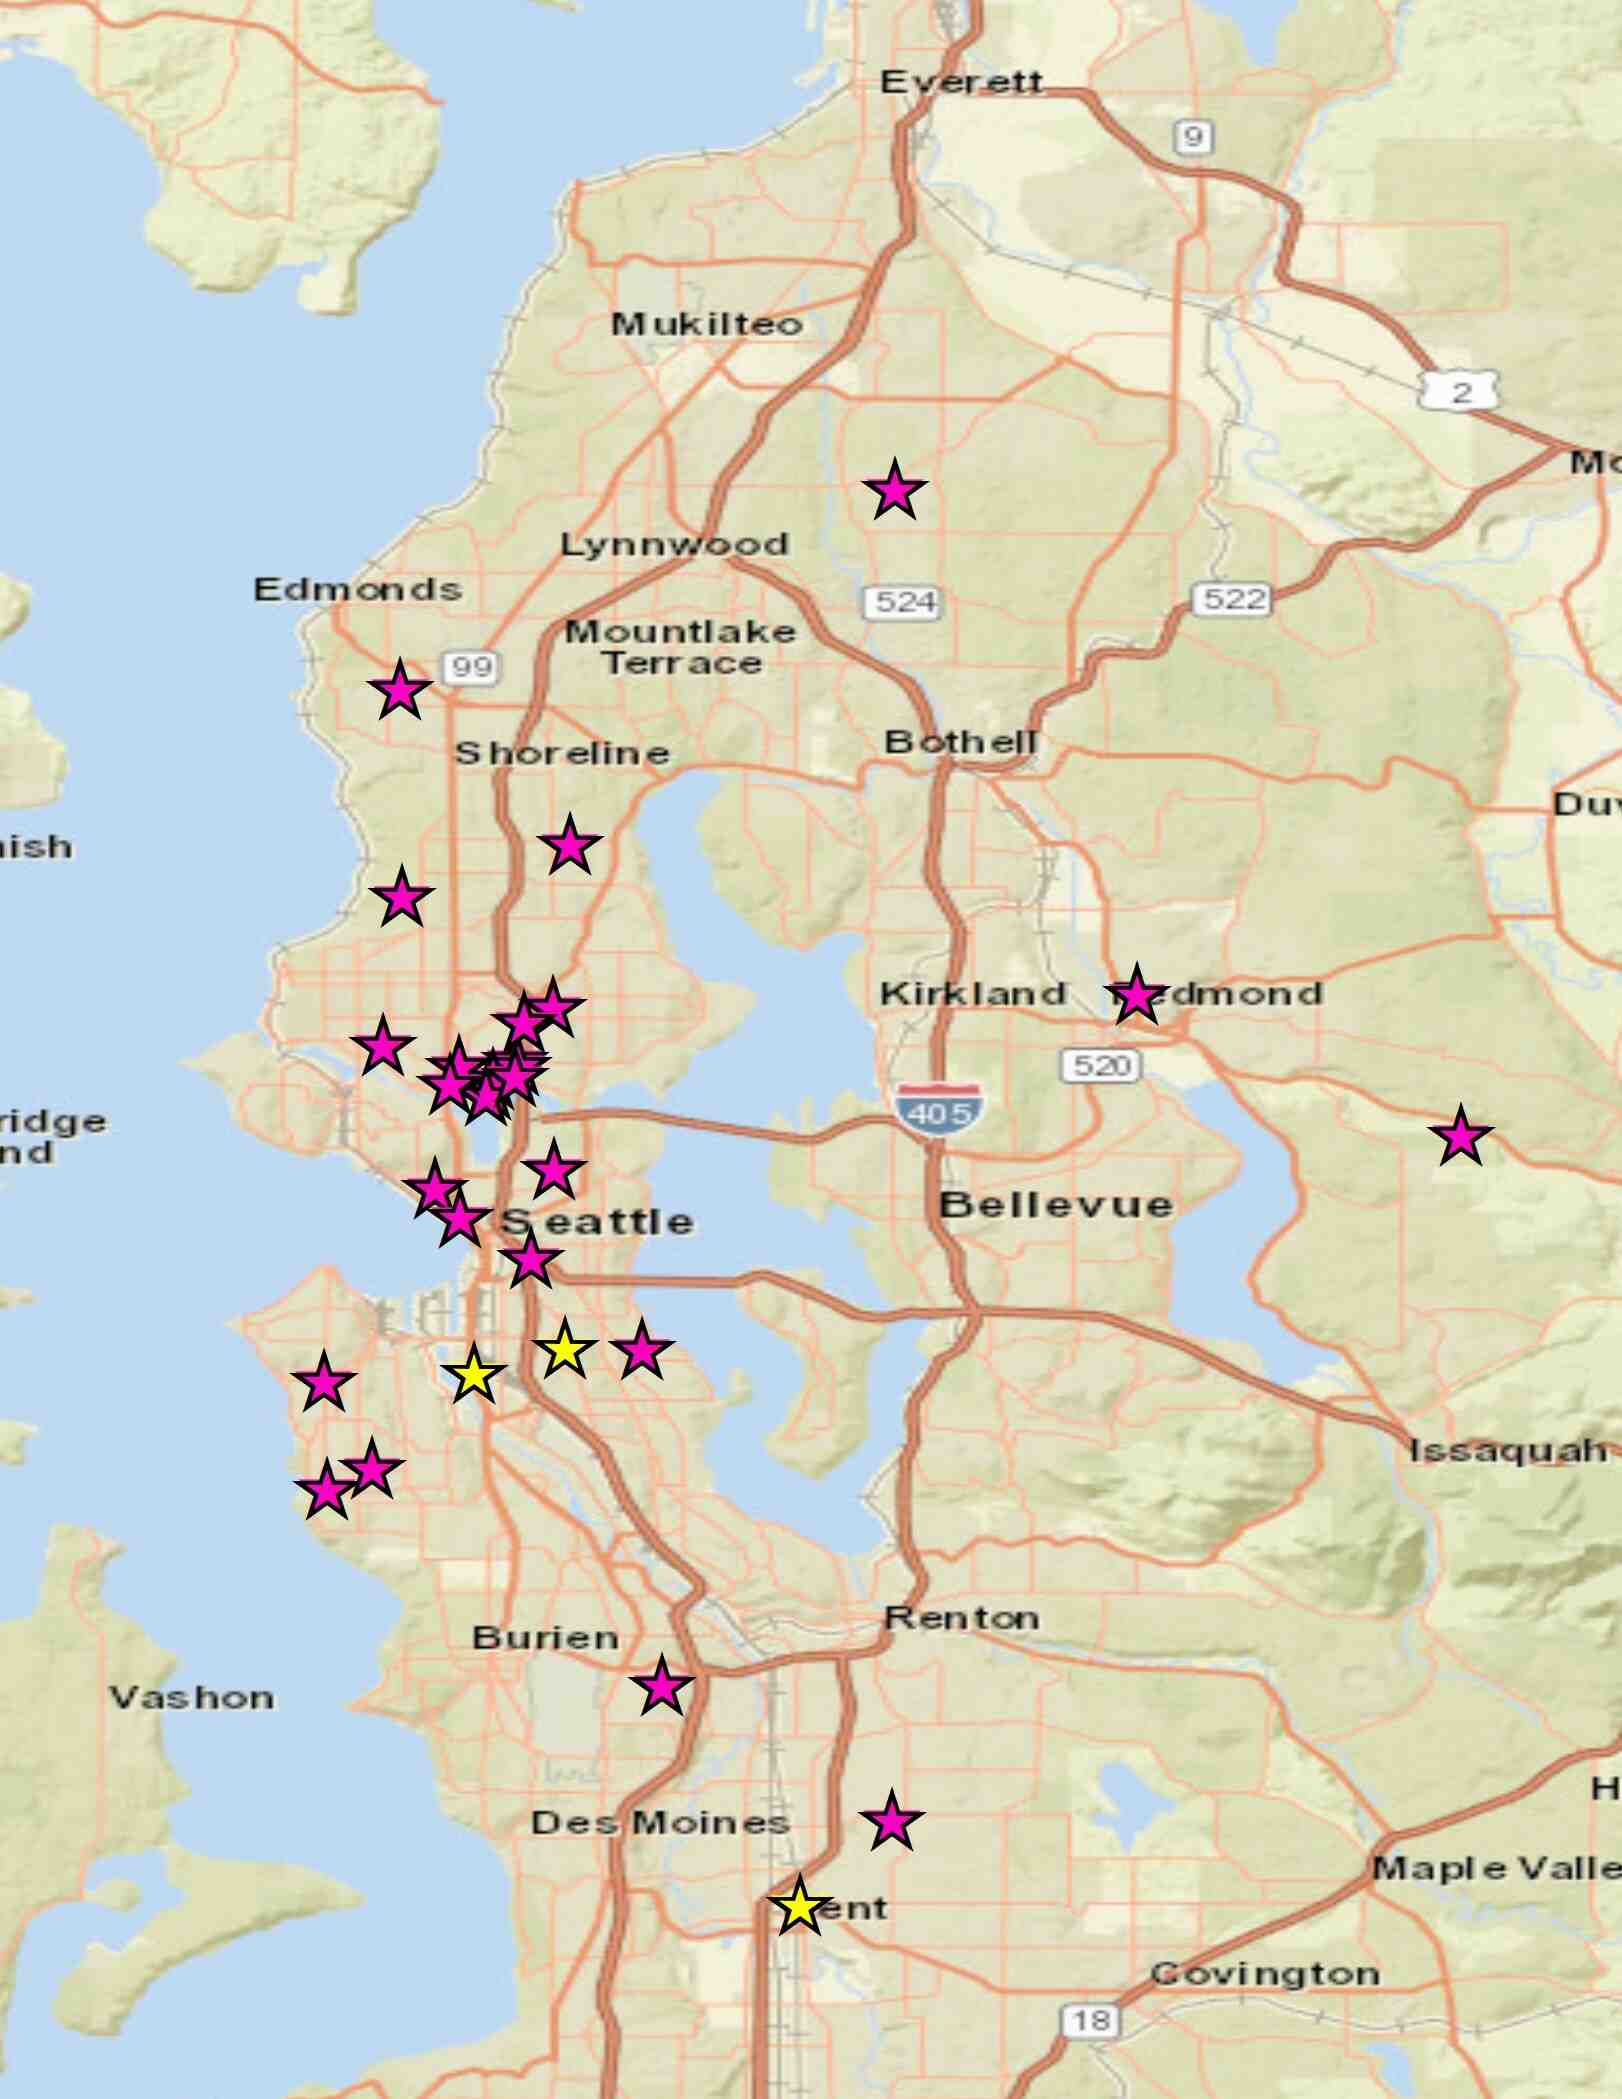 map of locations monitored in Puget Sound region